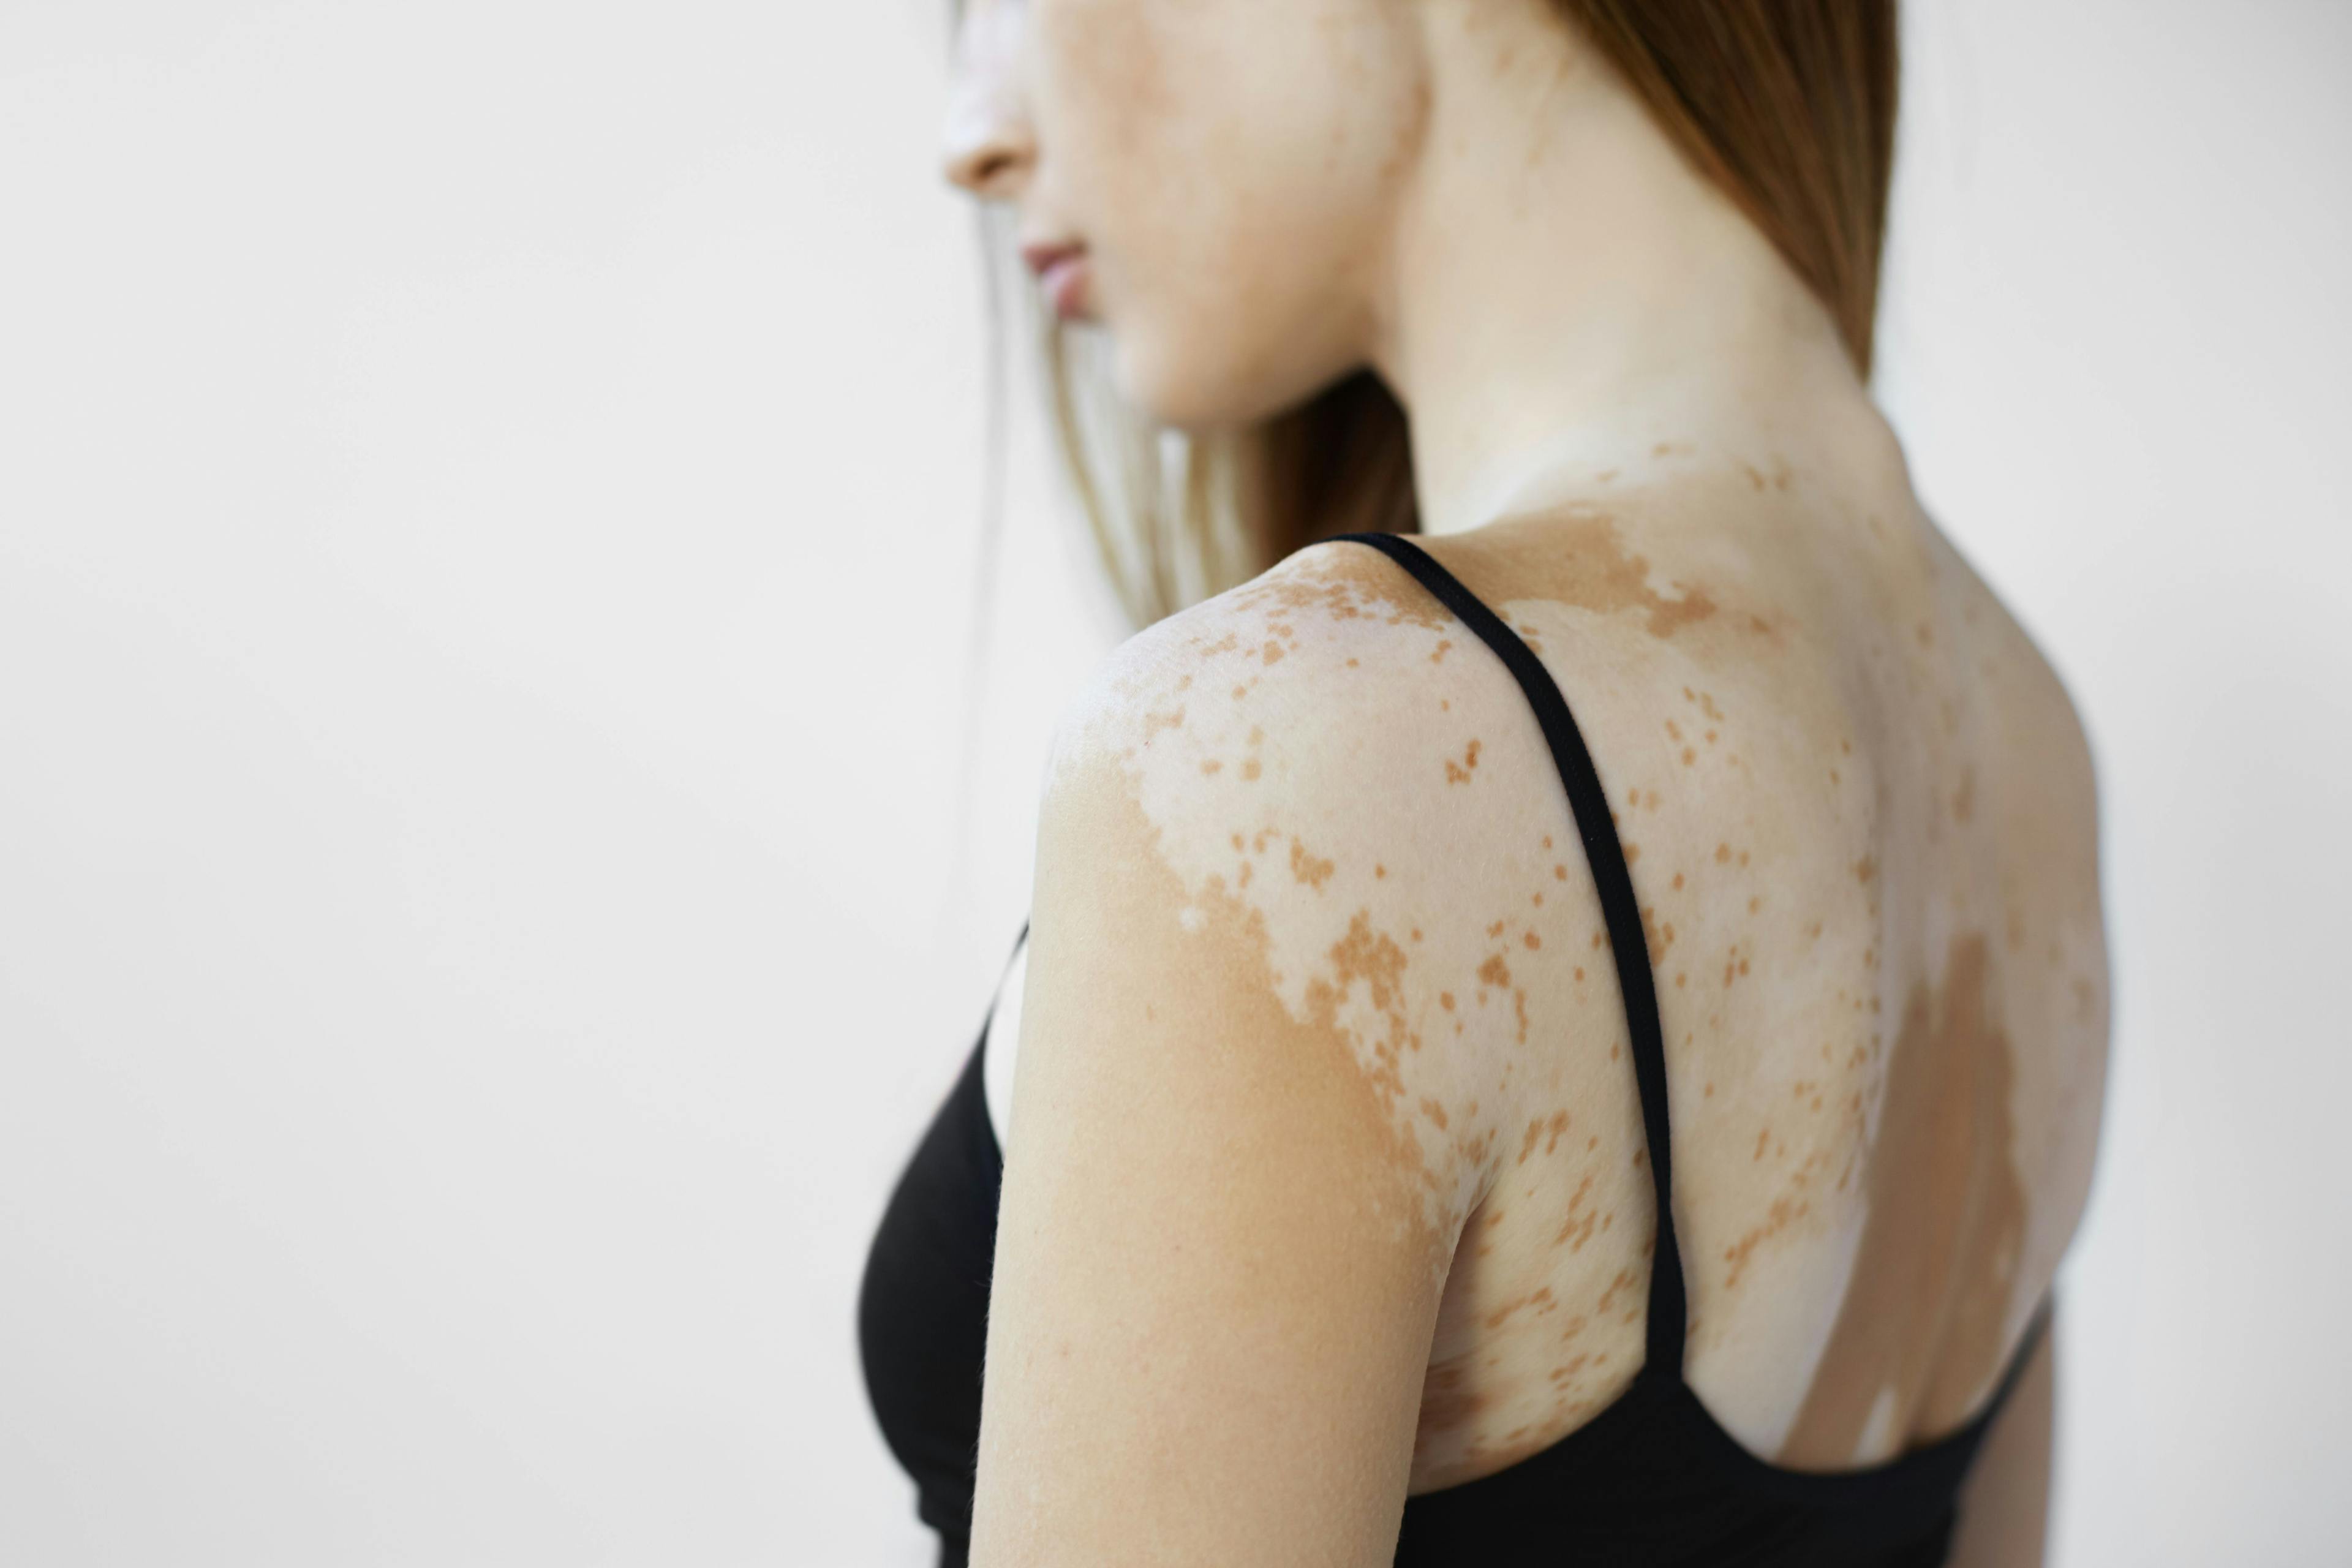 Simvastatin Can Be Effective in Treating Vitiligo Patients with Dyslipidemia